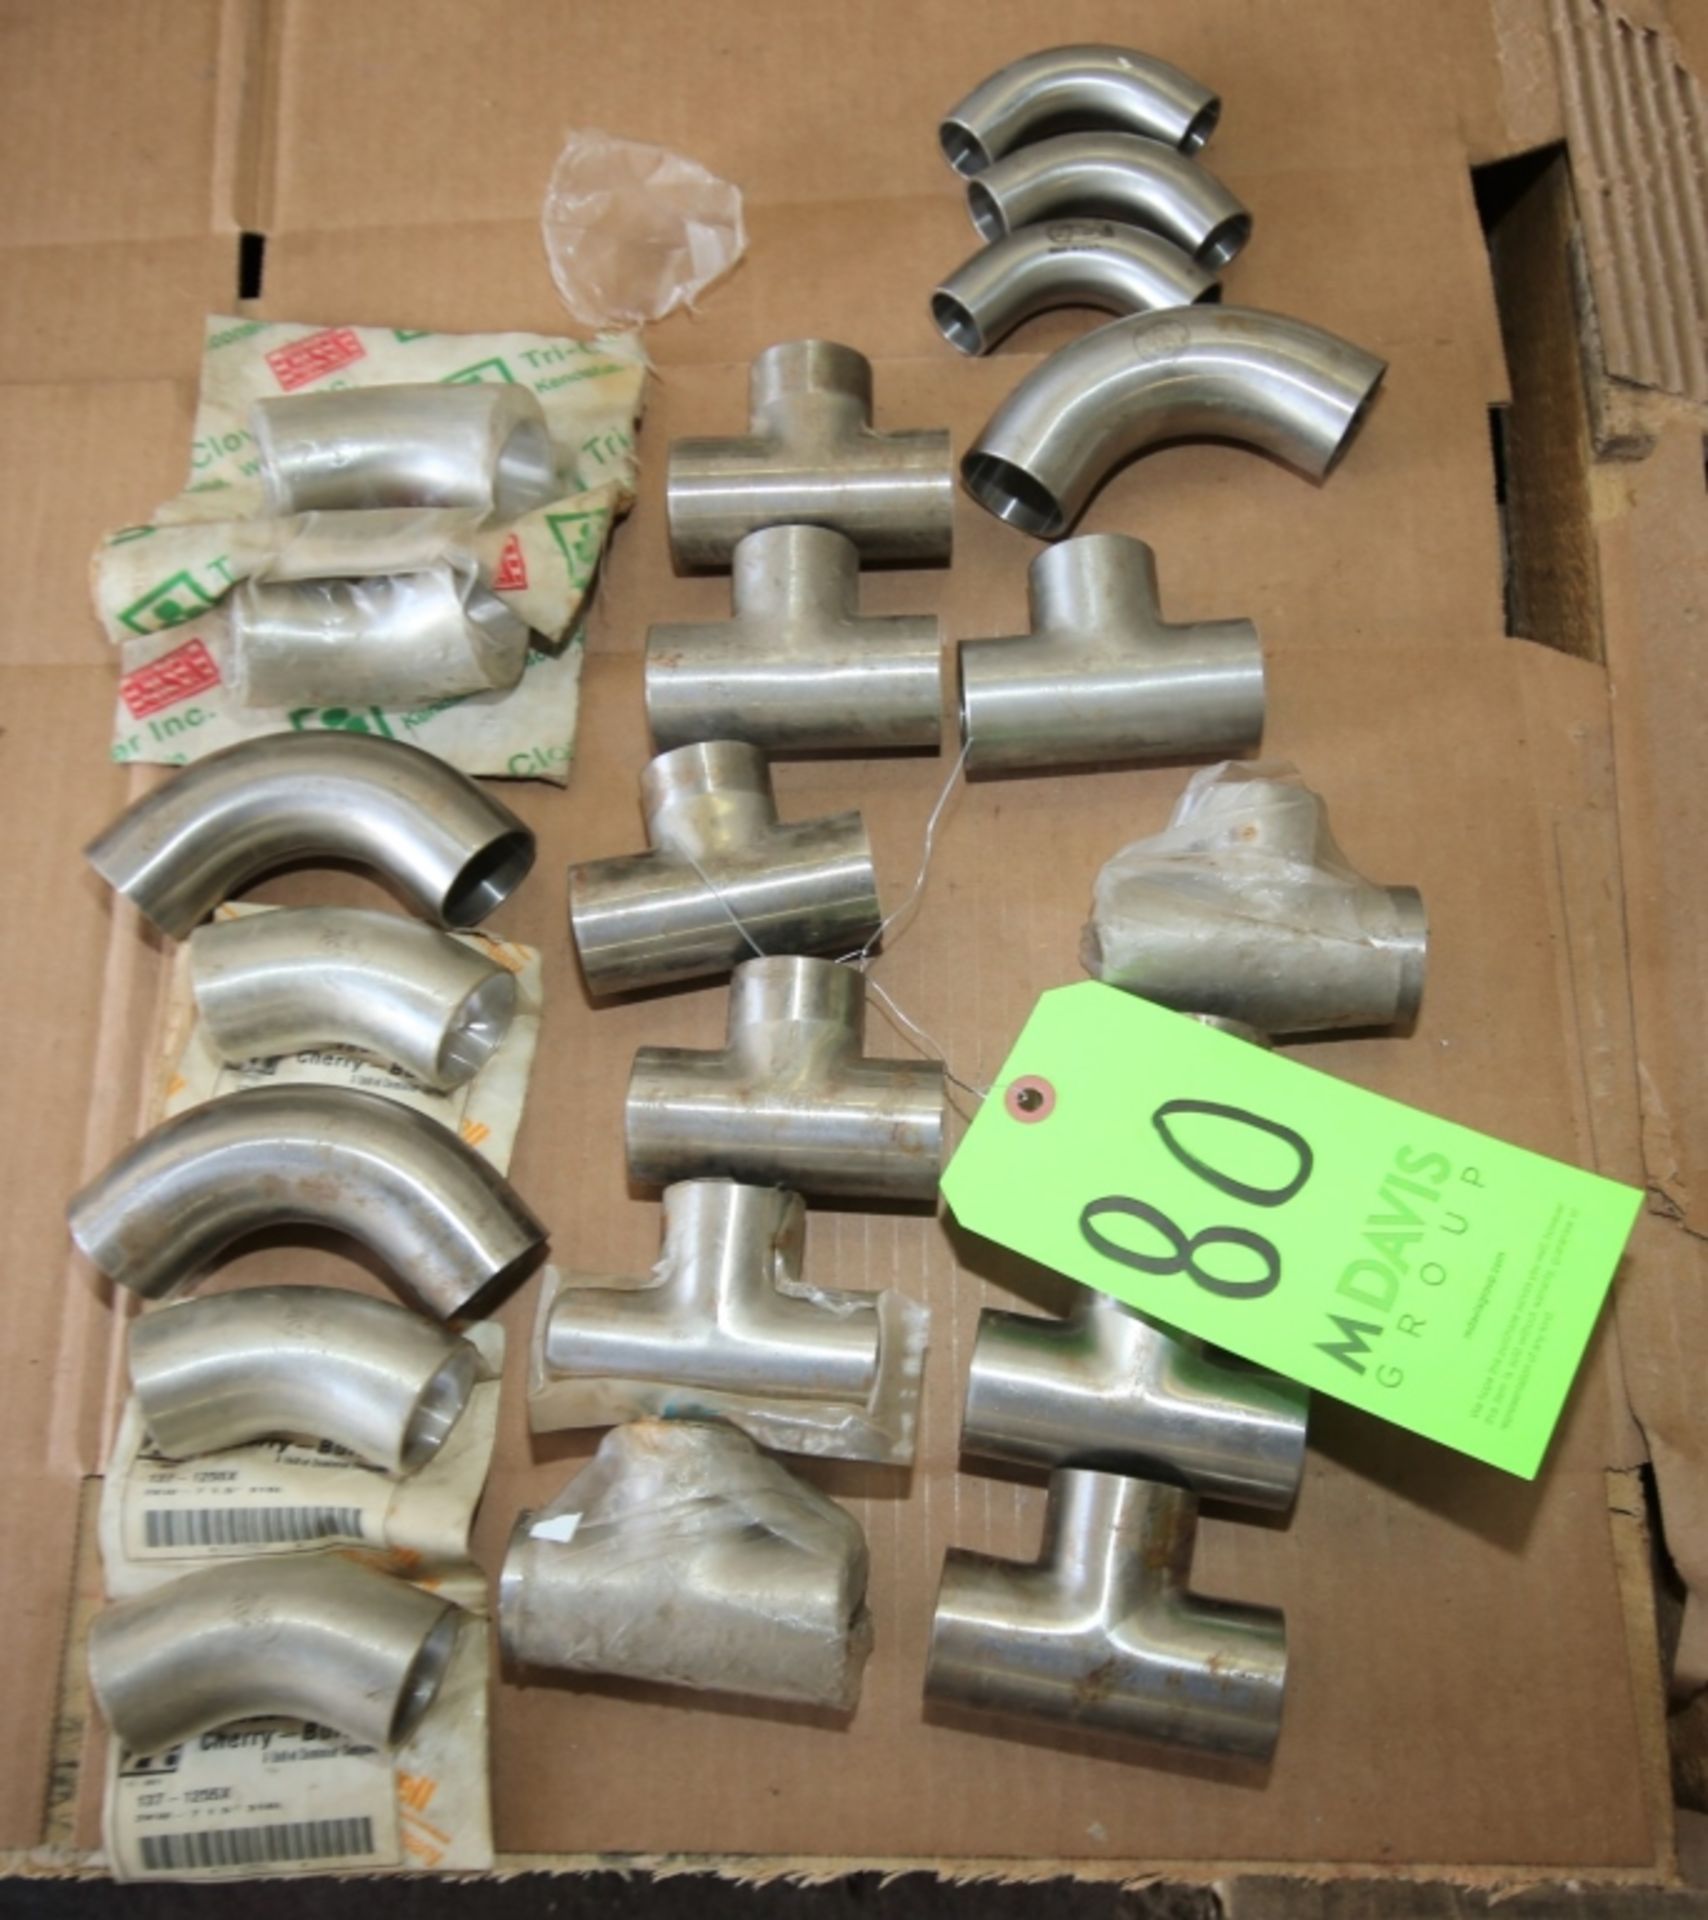 New Weld Type S/S Elbows and Tees; Includes (8) 1" Elbows and (11) 1.5" Tees